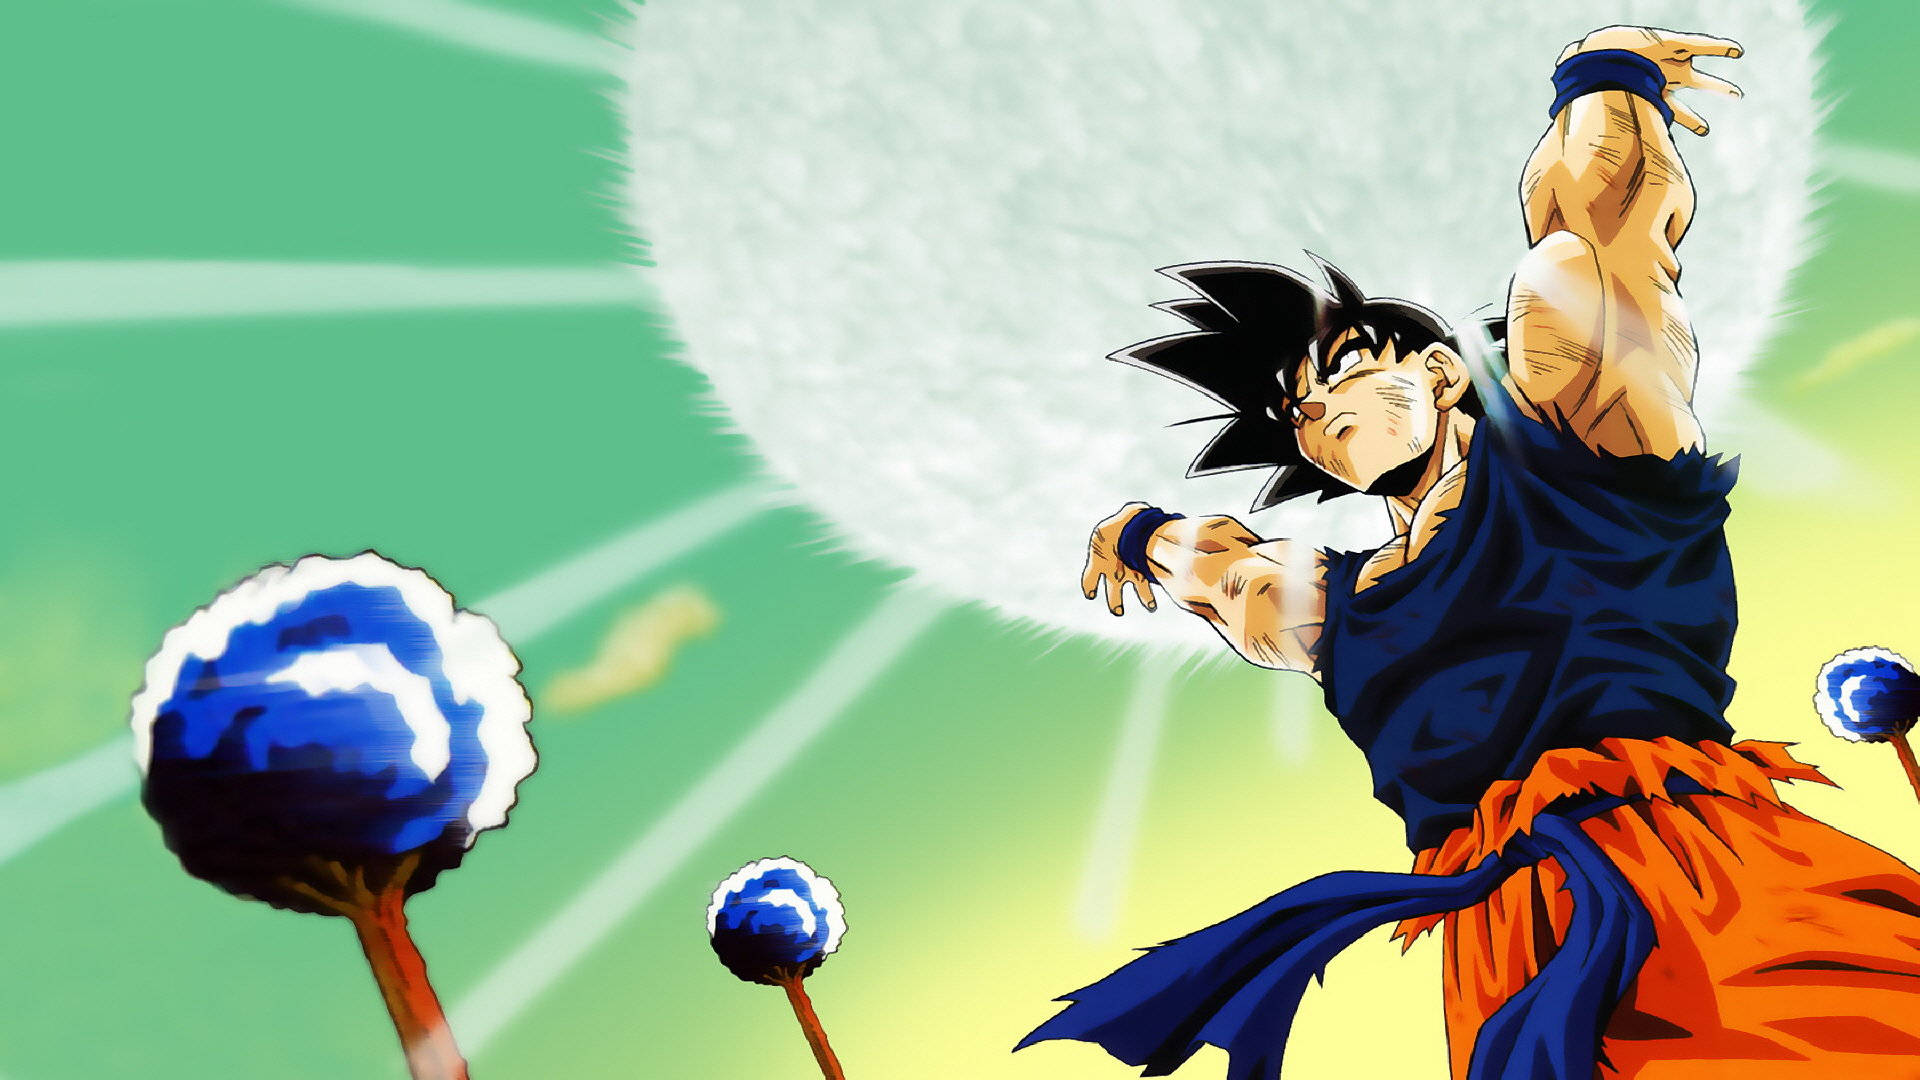 Cool Dragon Ball Z Carrying A Sphere Background